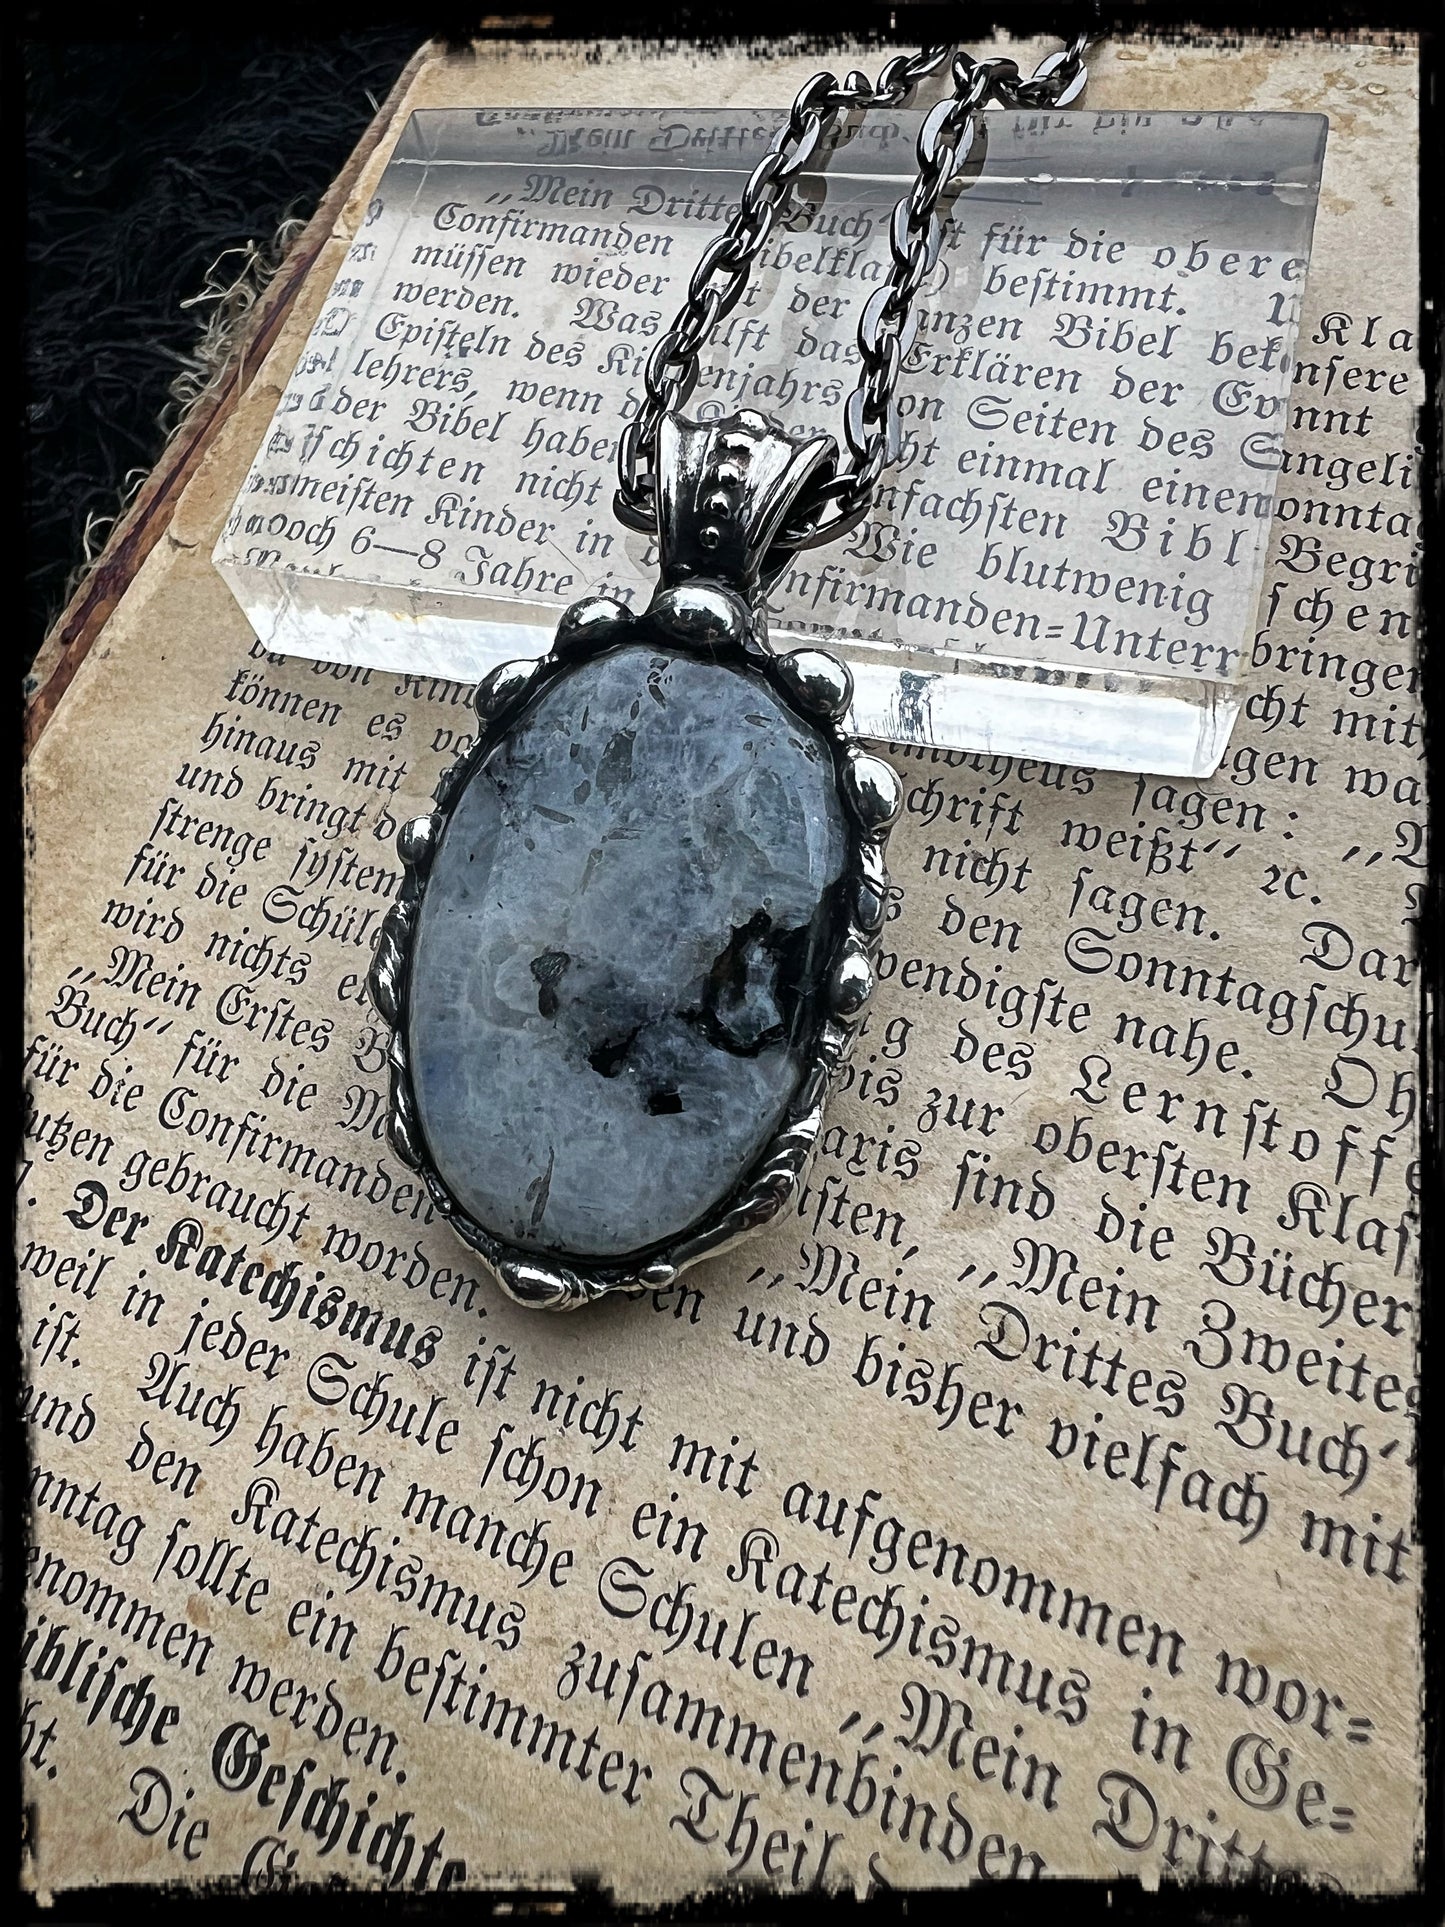 Hand crafted black tourmaline included moonstone Tiffany technique pendant necklace ~